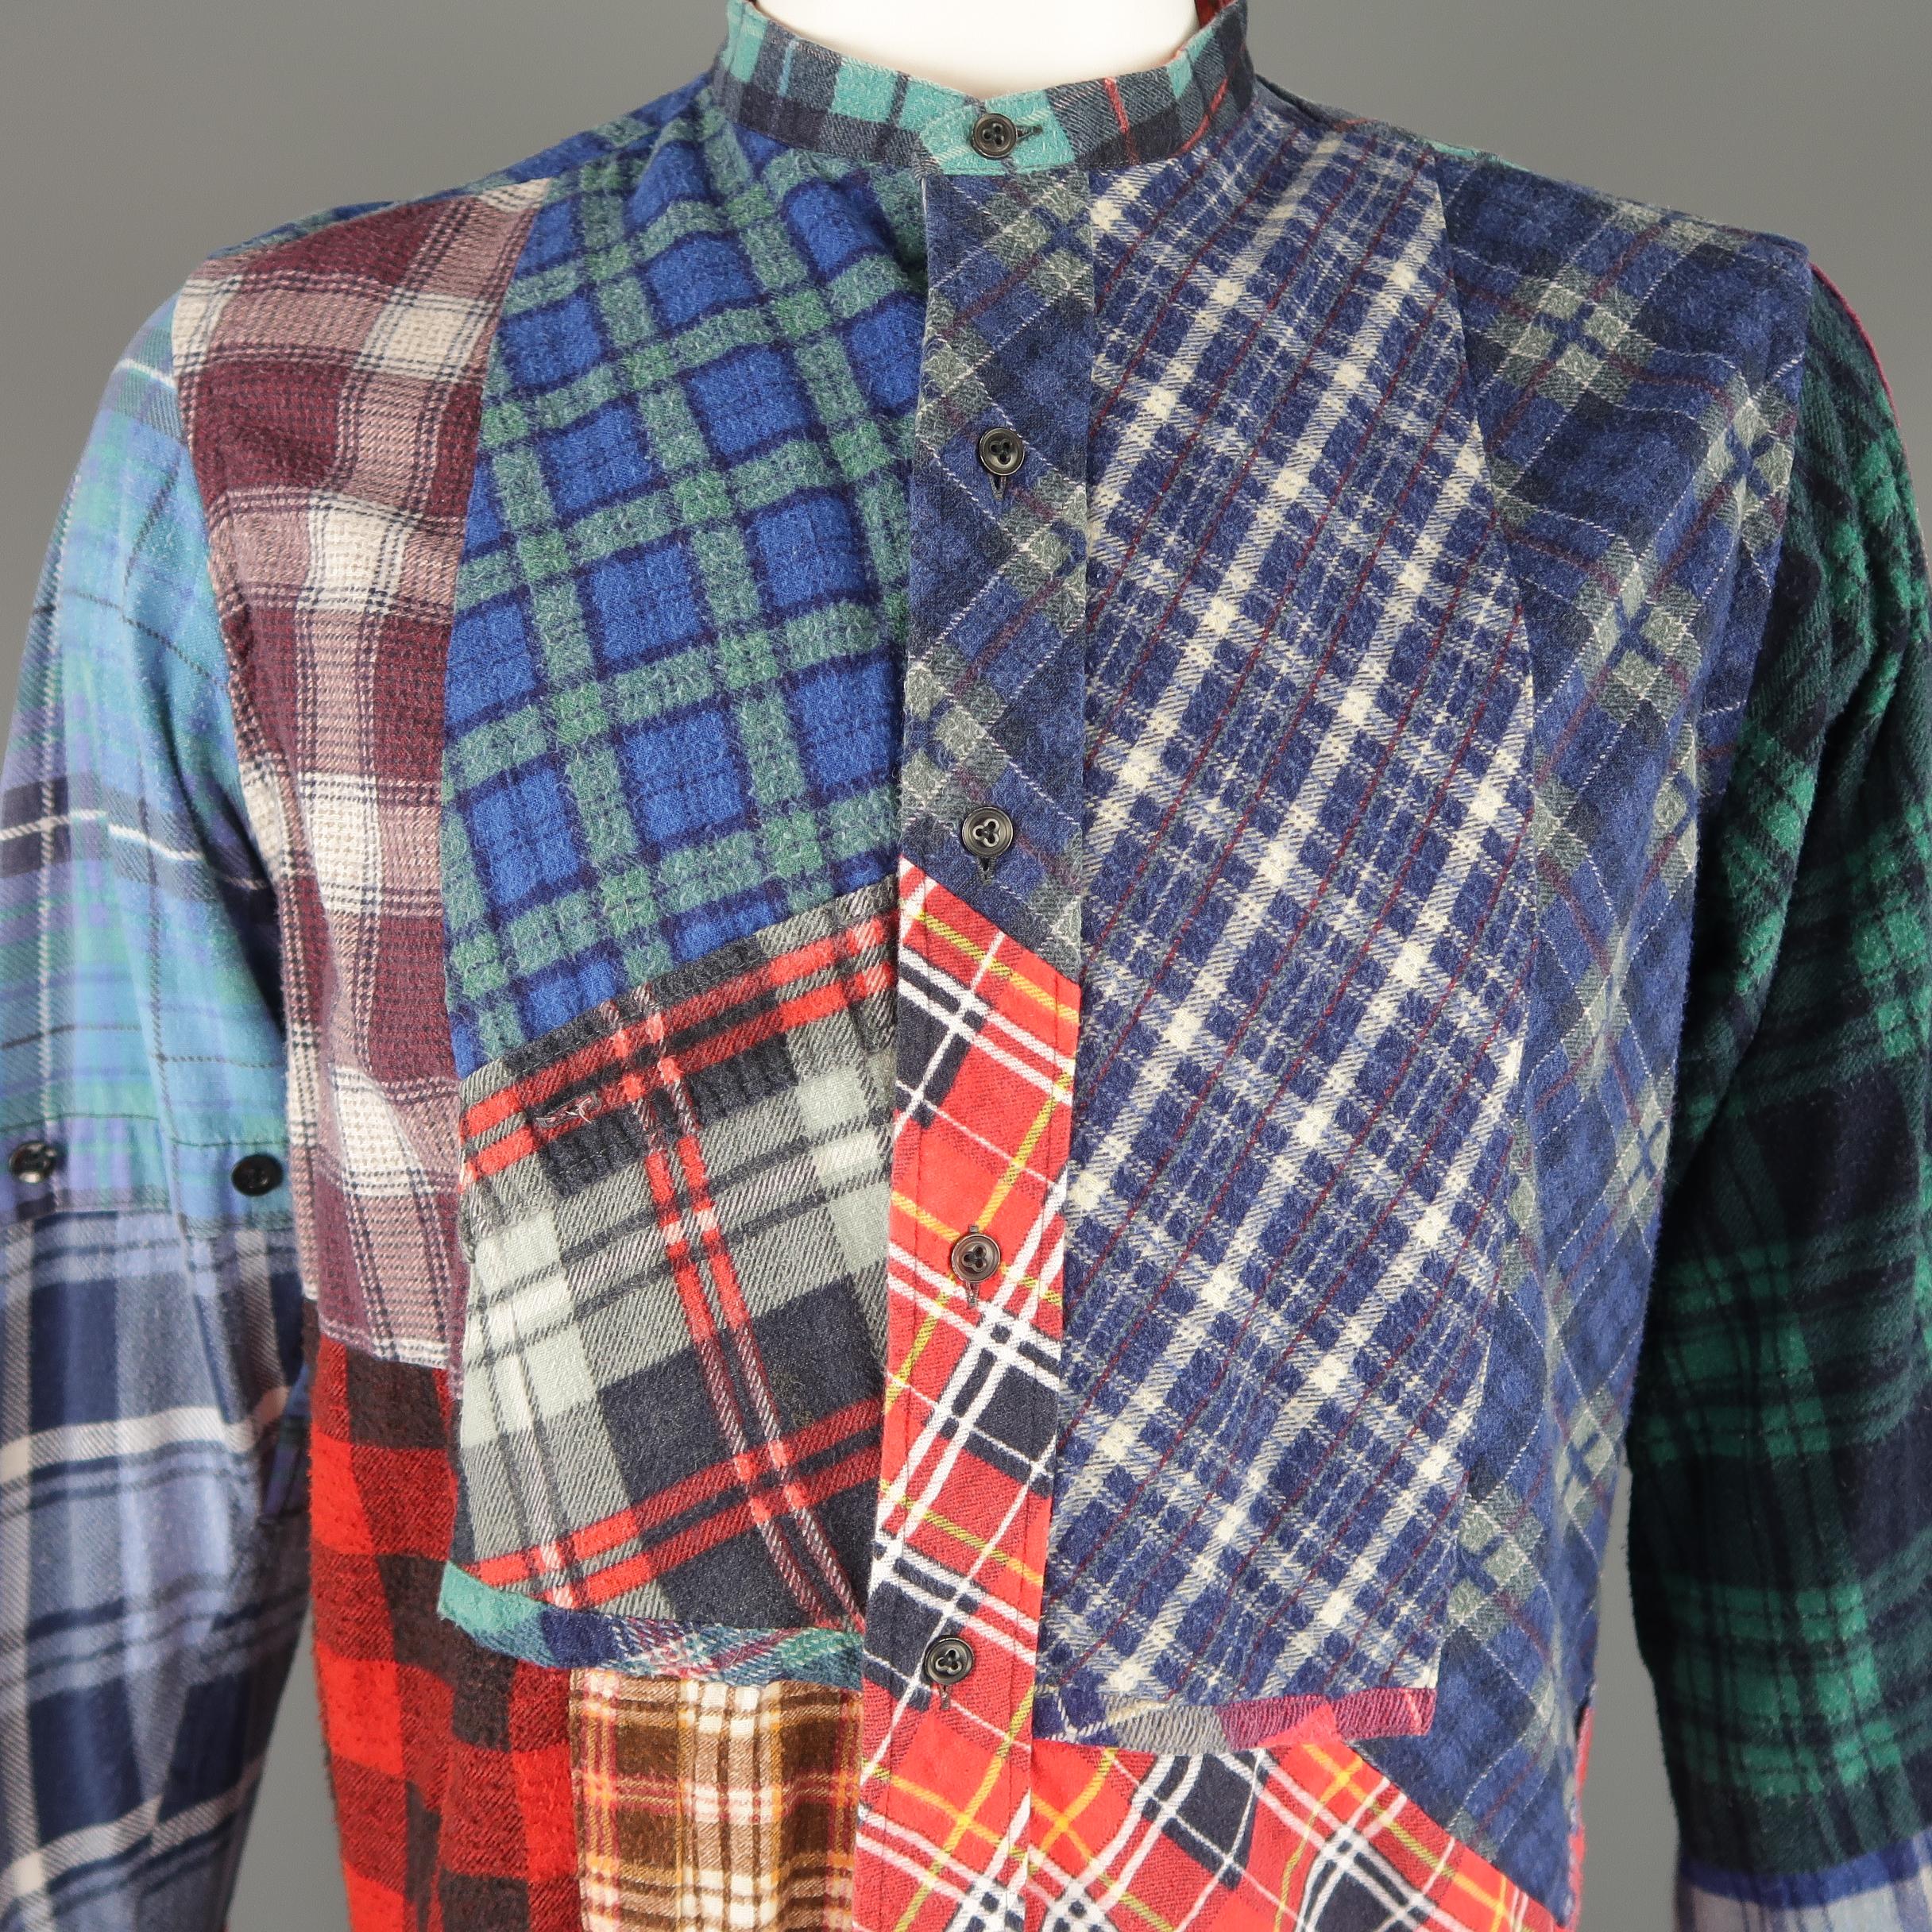 REBUILD BY NEEDLES shirt comes in mixed cotton plaid flannel patchwork panels with a band collar.  Made in Japan.
 
Excellent Pre-Owned Condition.
Marked: XL
 
Measurements:
 
Shoulder: 17 in.
Chest: 50 in.
Sleeve: 26 in.
Length: 31 in.